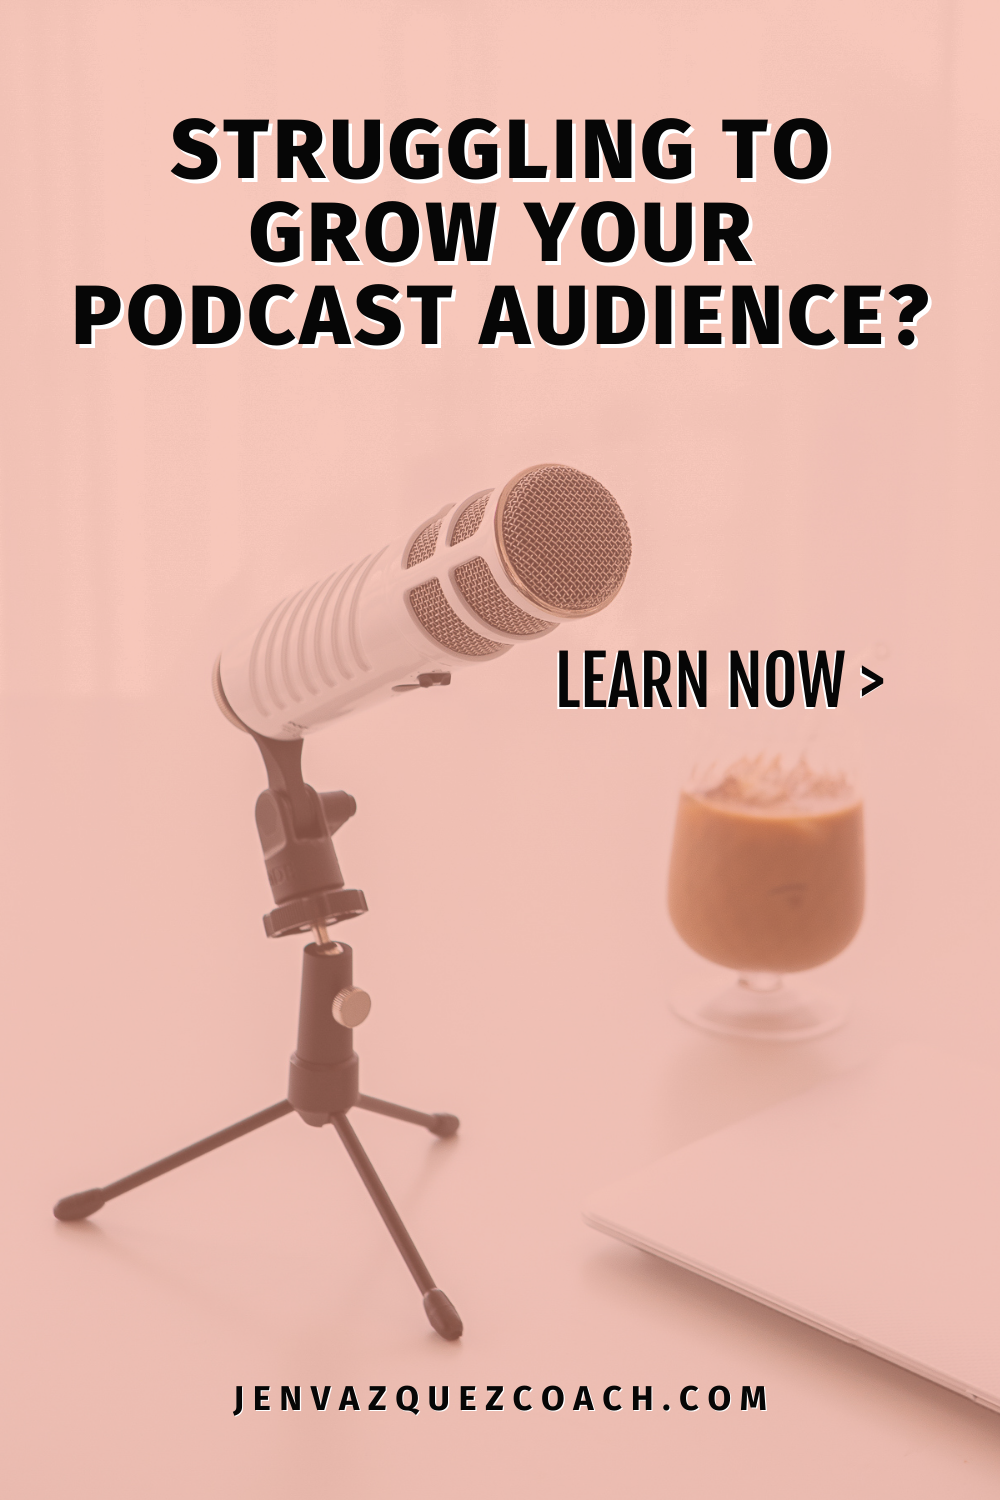 Struggling to Grow Your Podcast Audience? Pinterest Might Be the Missing Piece Jen Vazquez Media